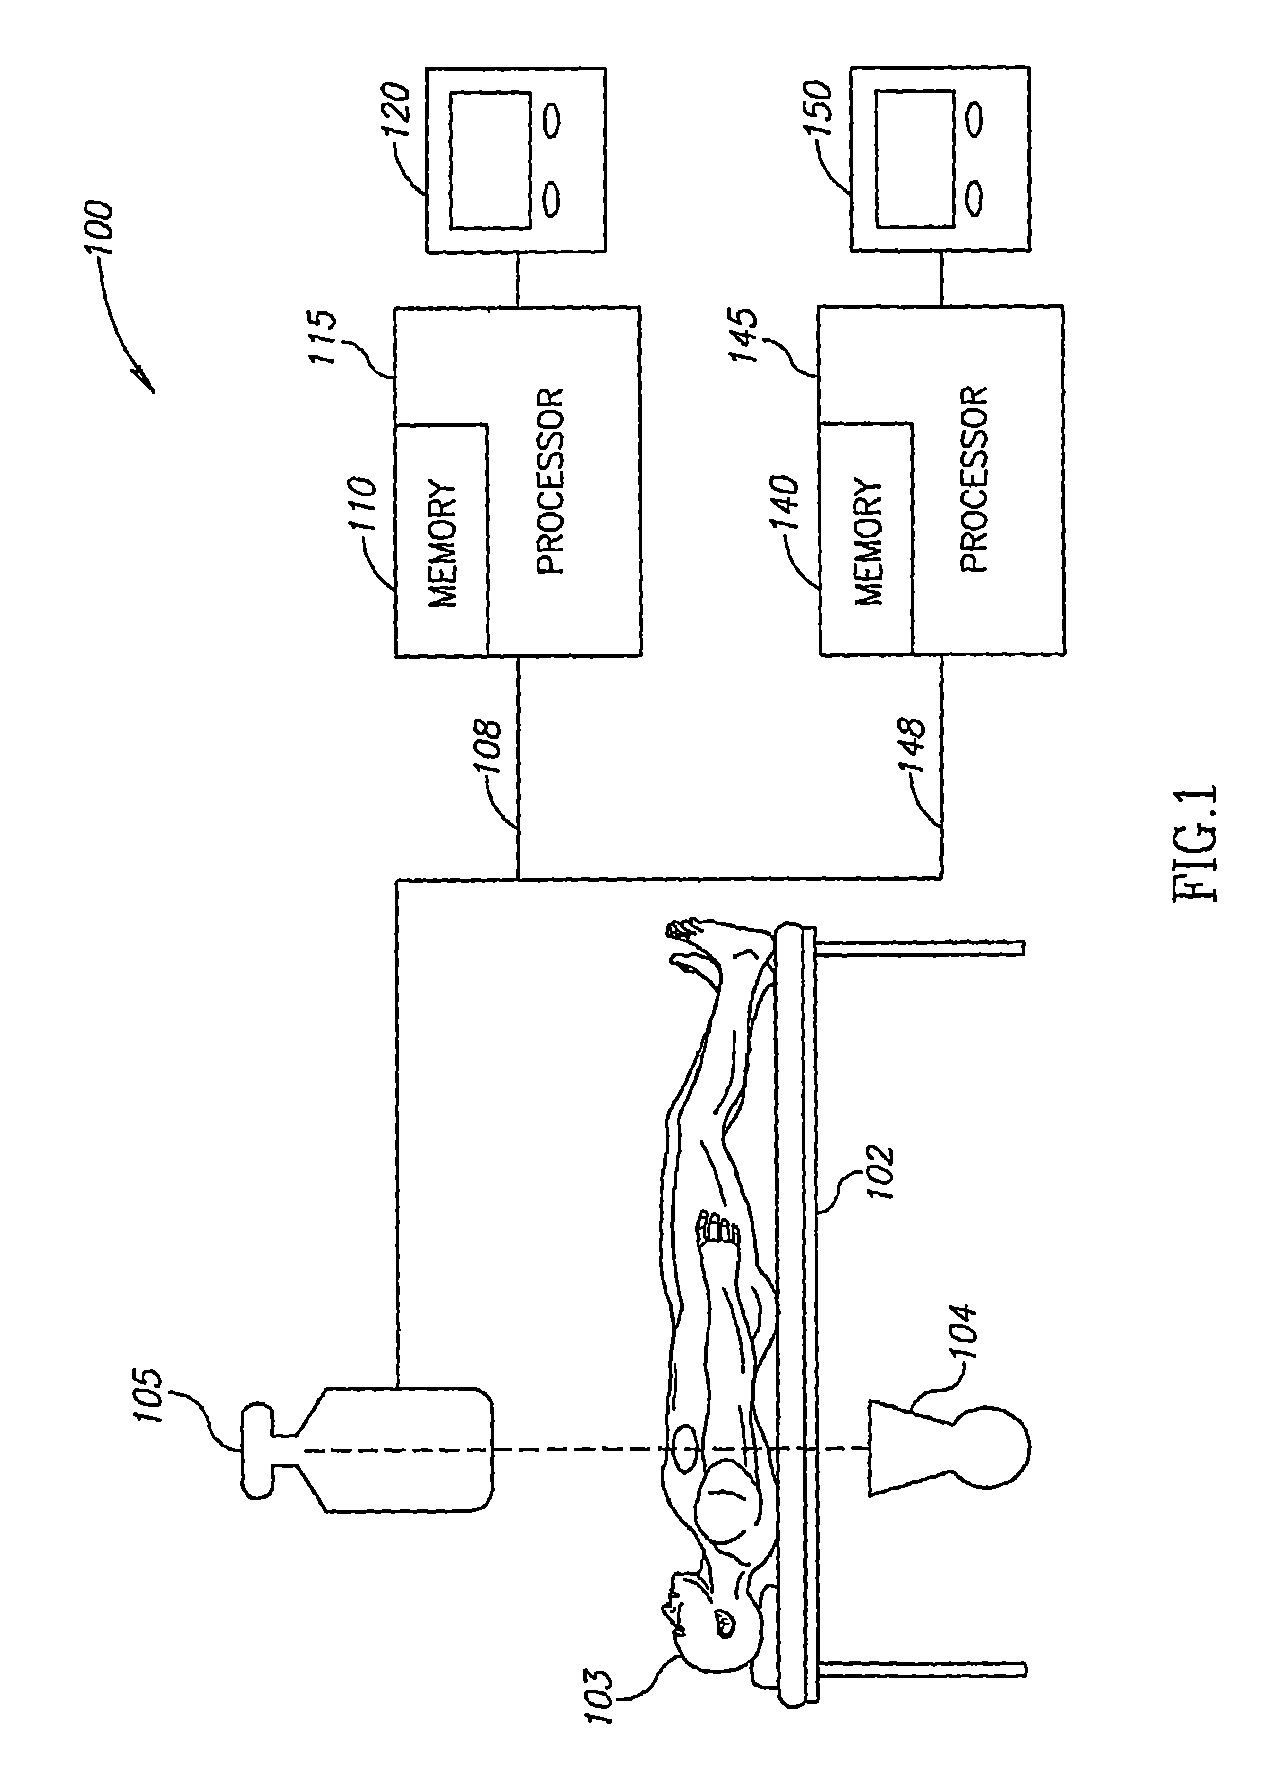 Method and apparatus for positioning a device in a tubular organ